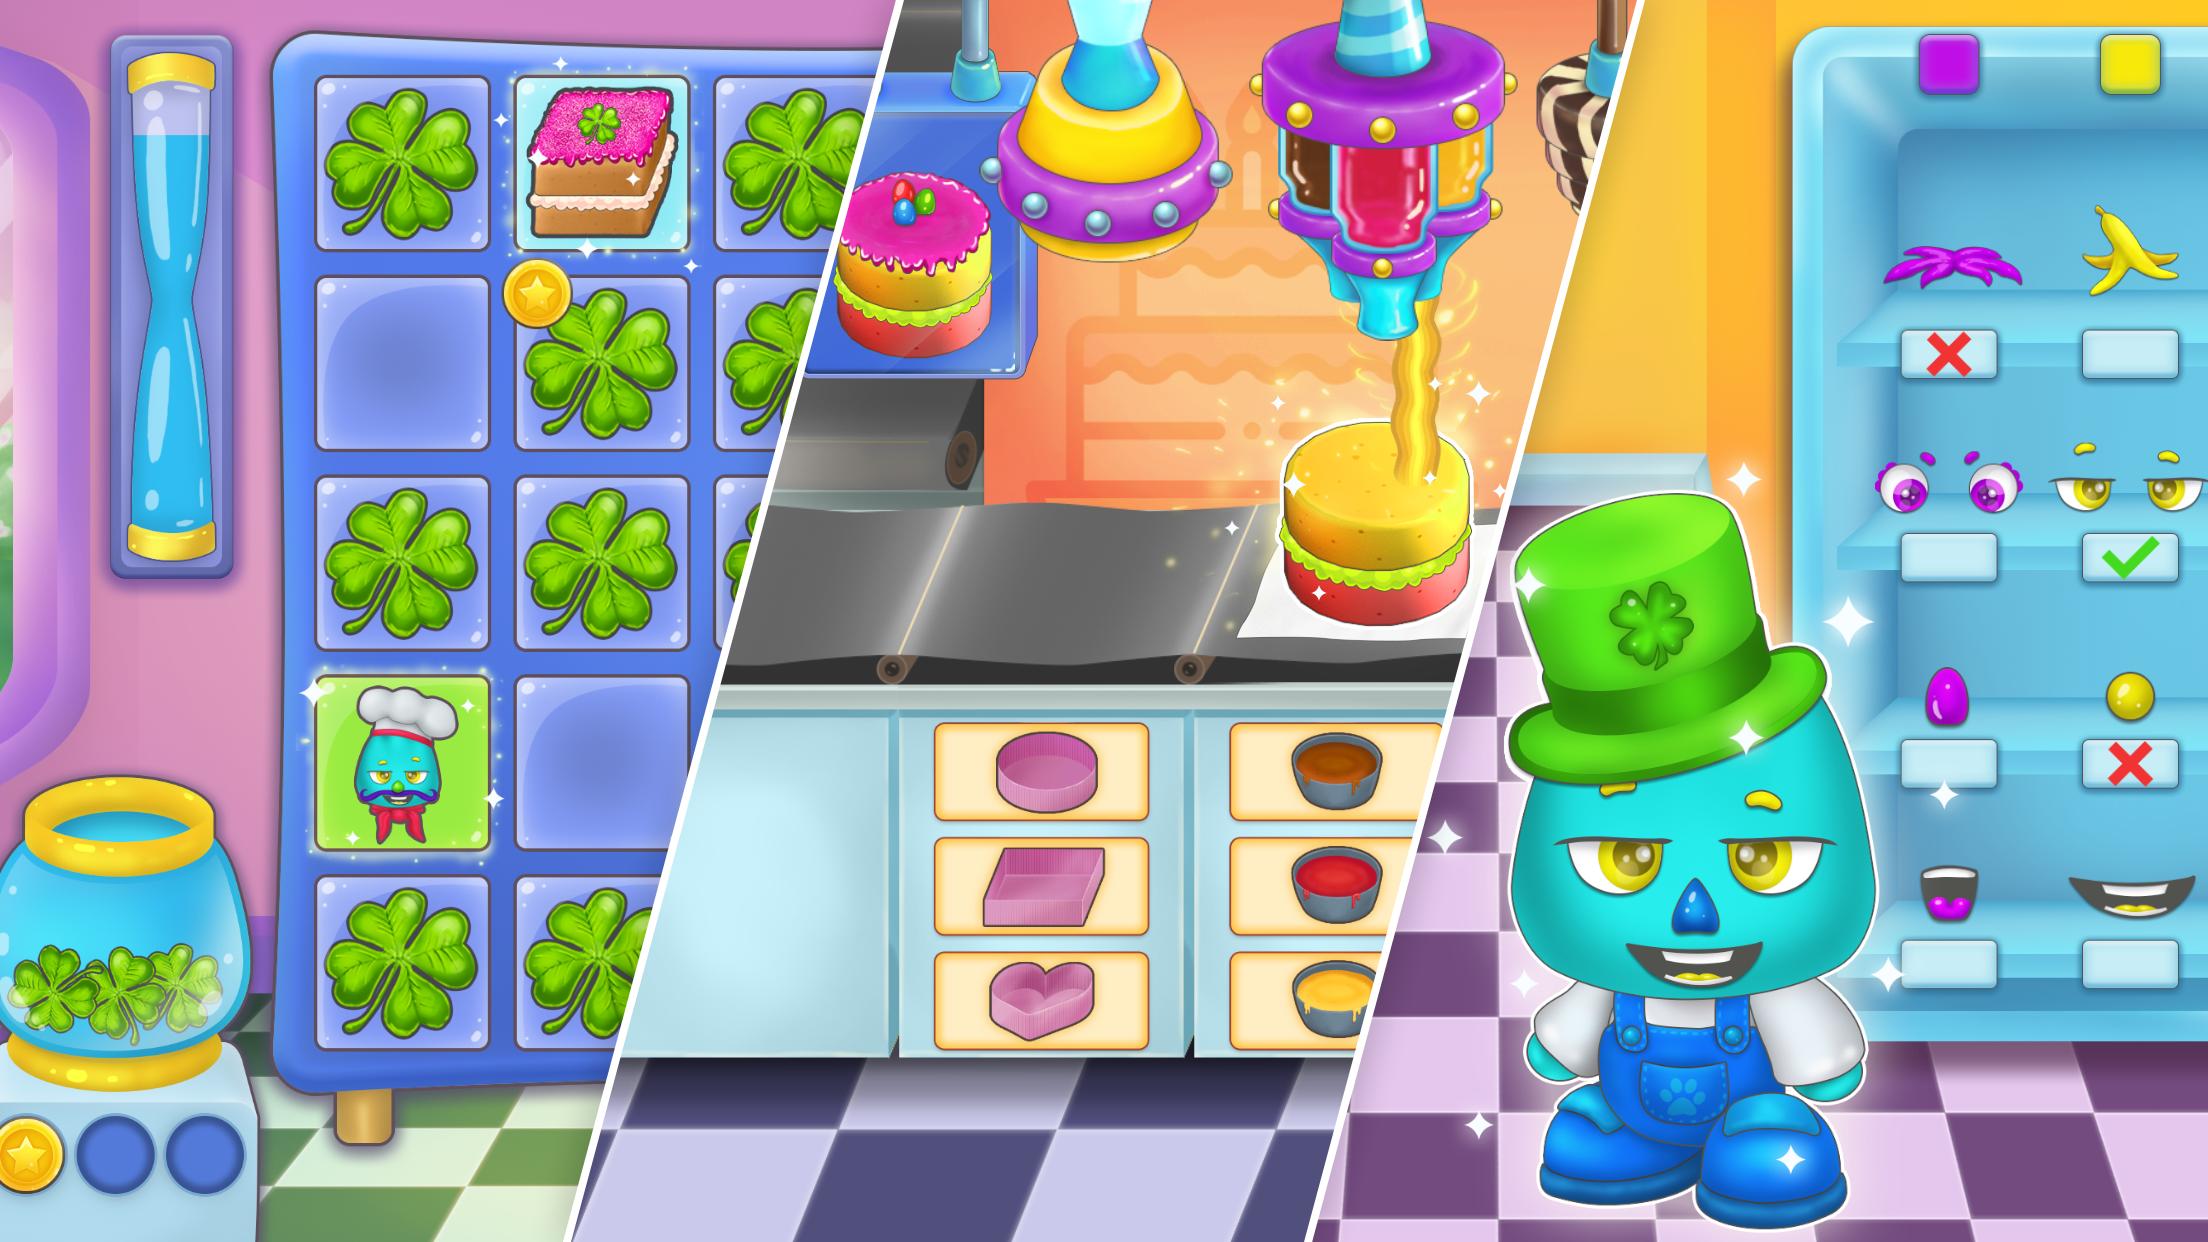 Fun 3D Cake Cooking Game- My Bakery Empire Color, Decorate Serve Cakes  Colorful Rainbow Cake - YouTube